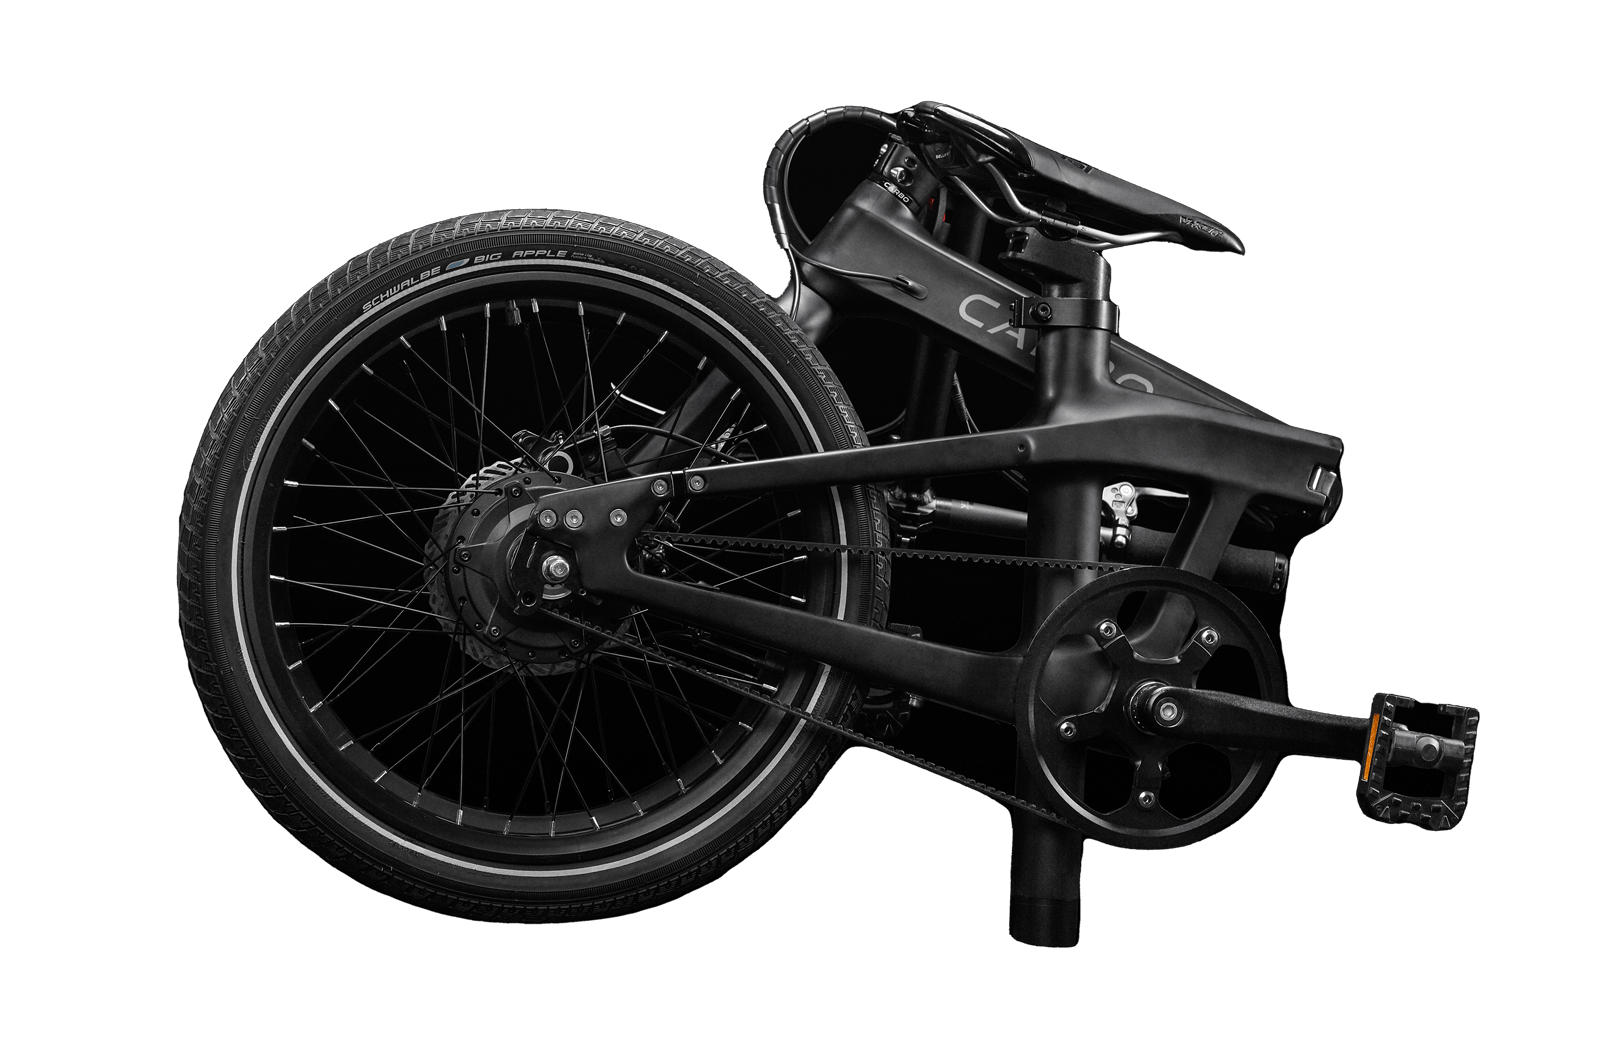 This French company has designed the first e-bike that doesn't